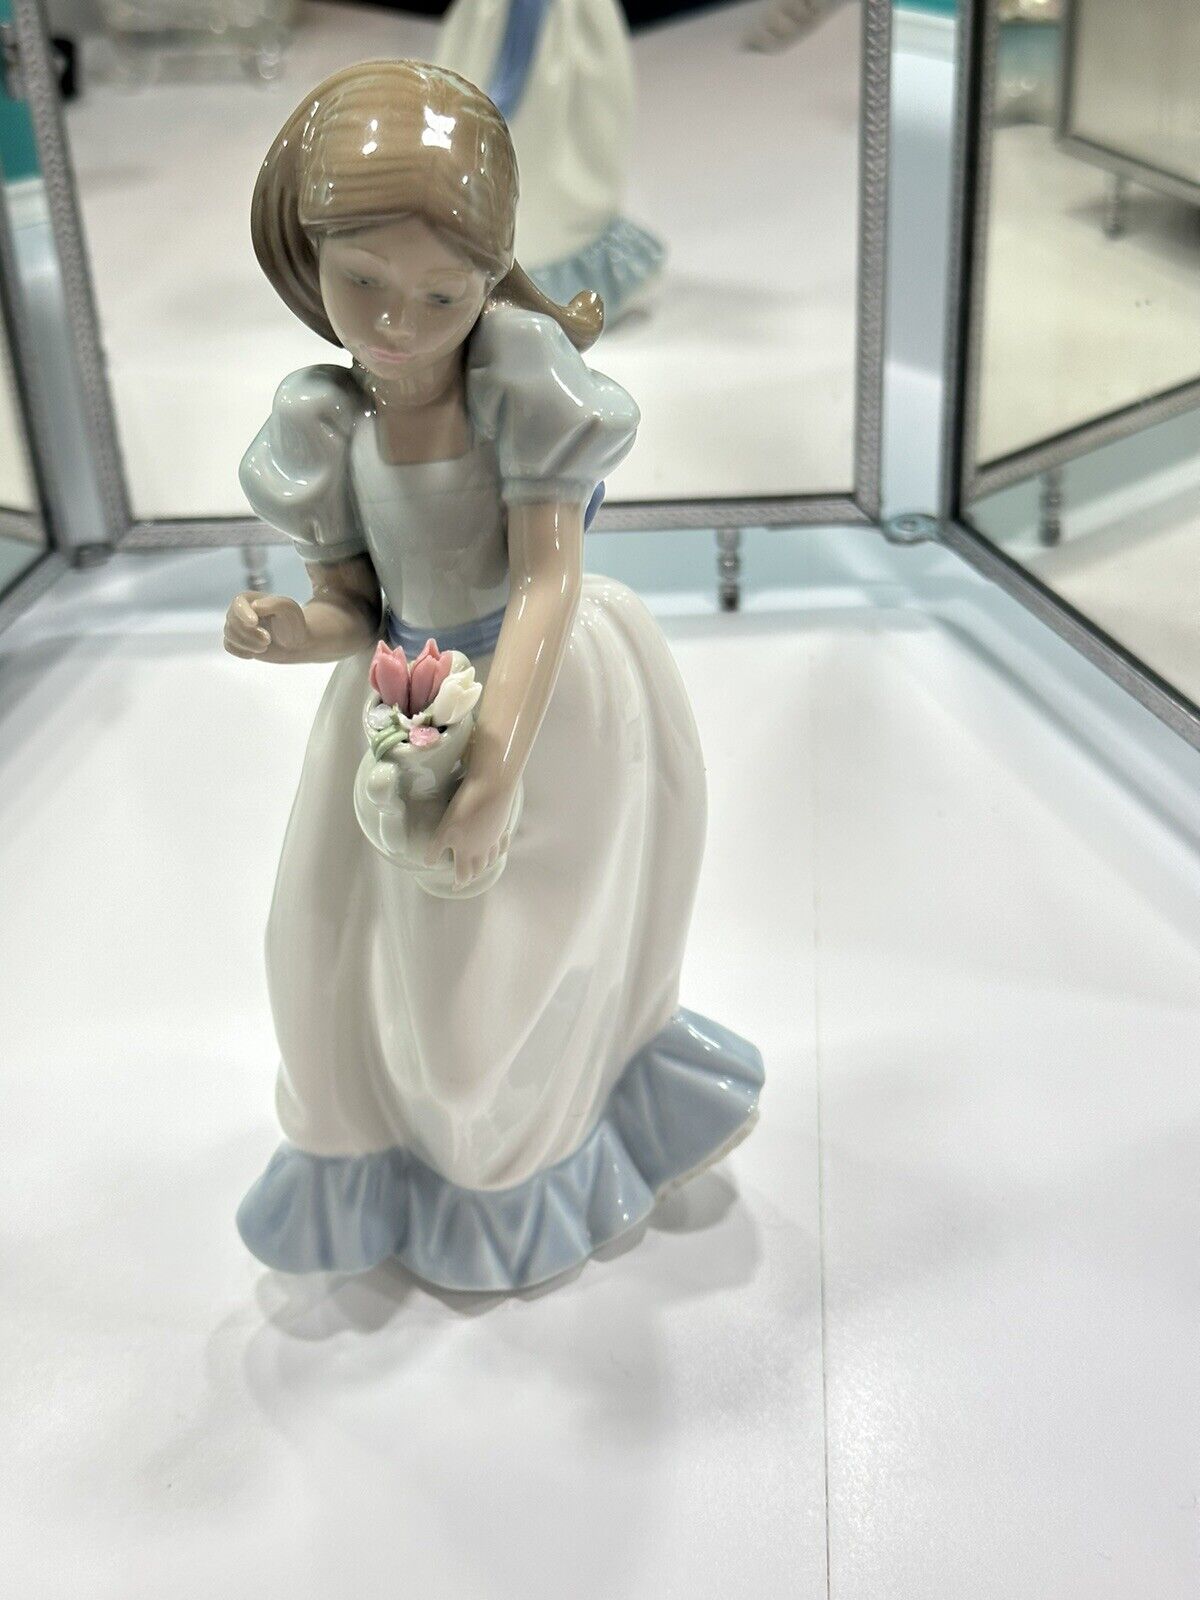 Nao By Lladro “Tulip Time” 8 in. Girl Figurine Holding Basket Of Tulips READ